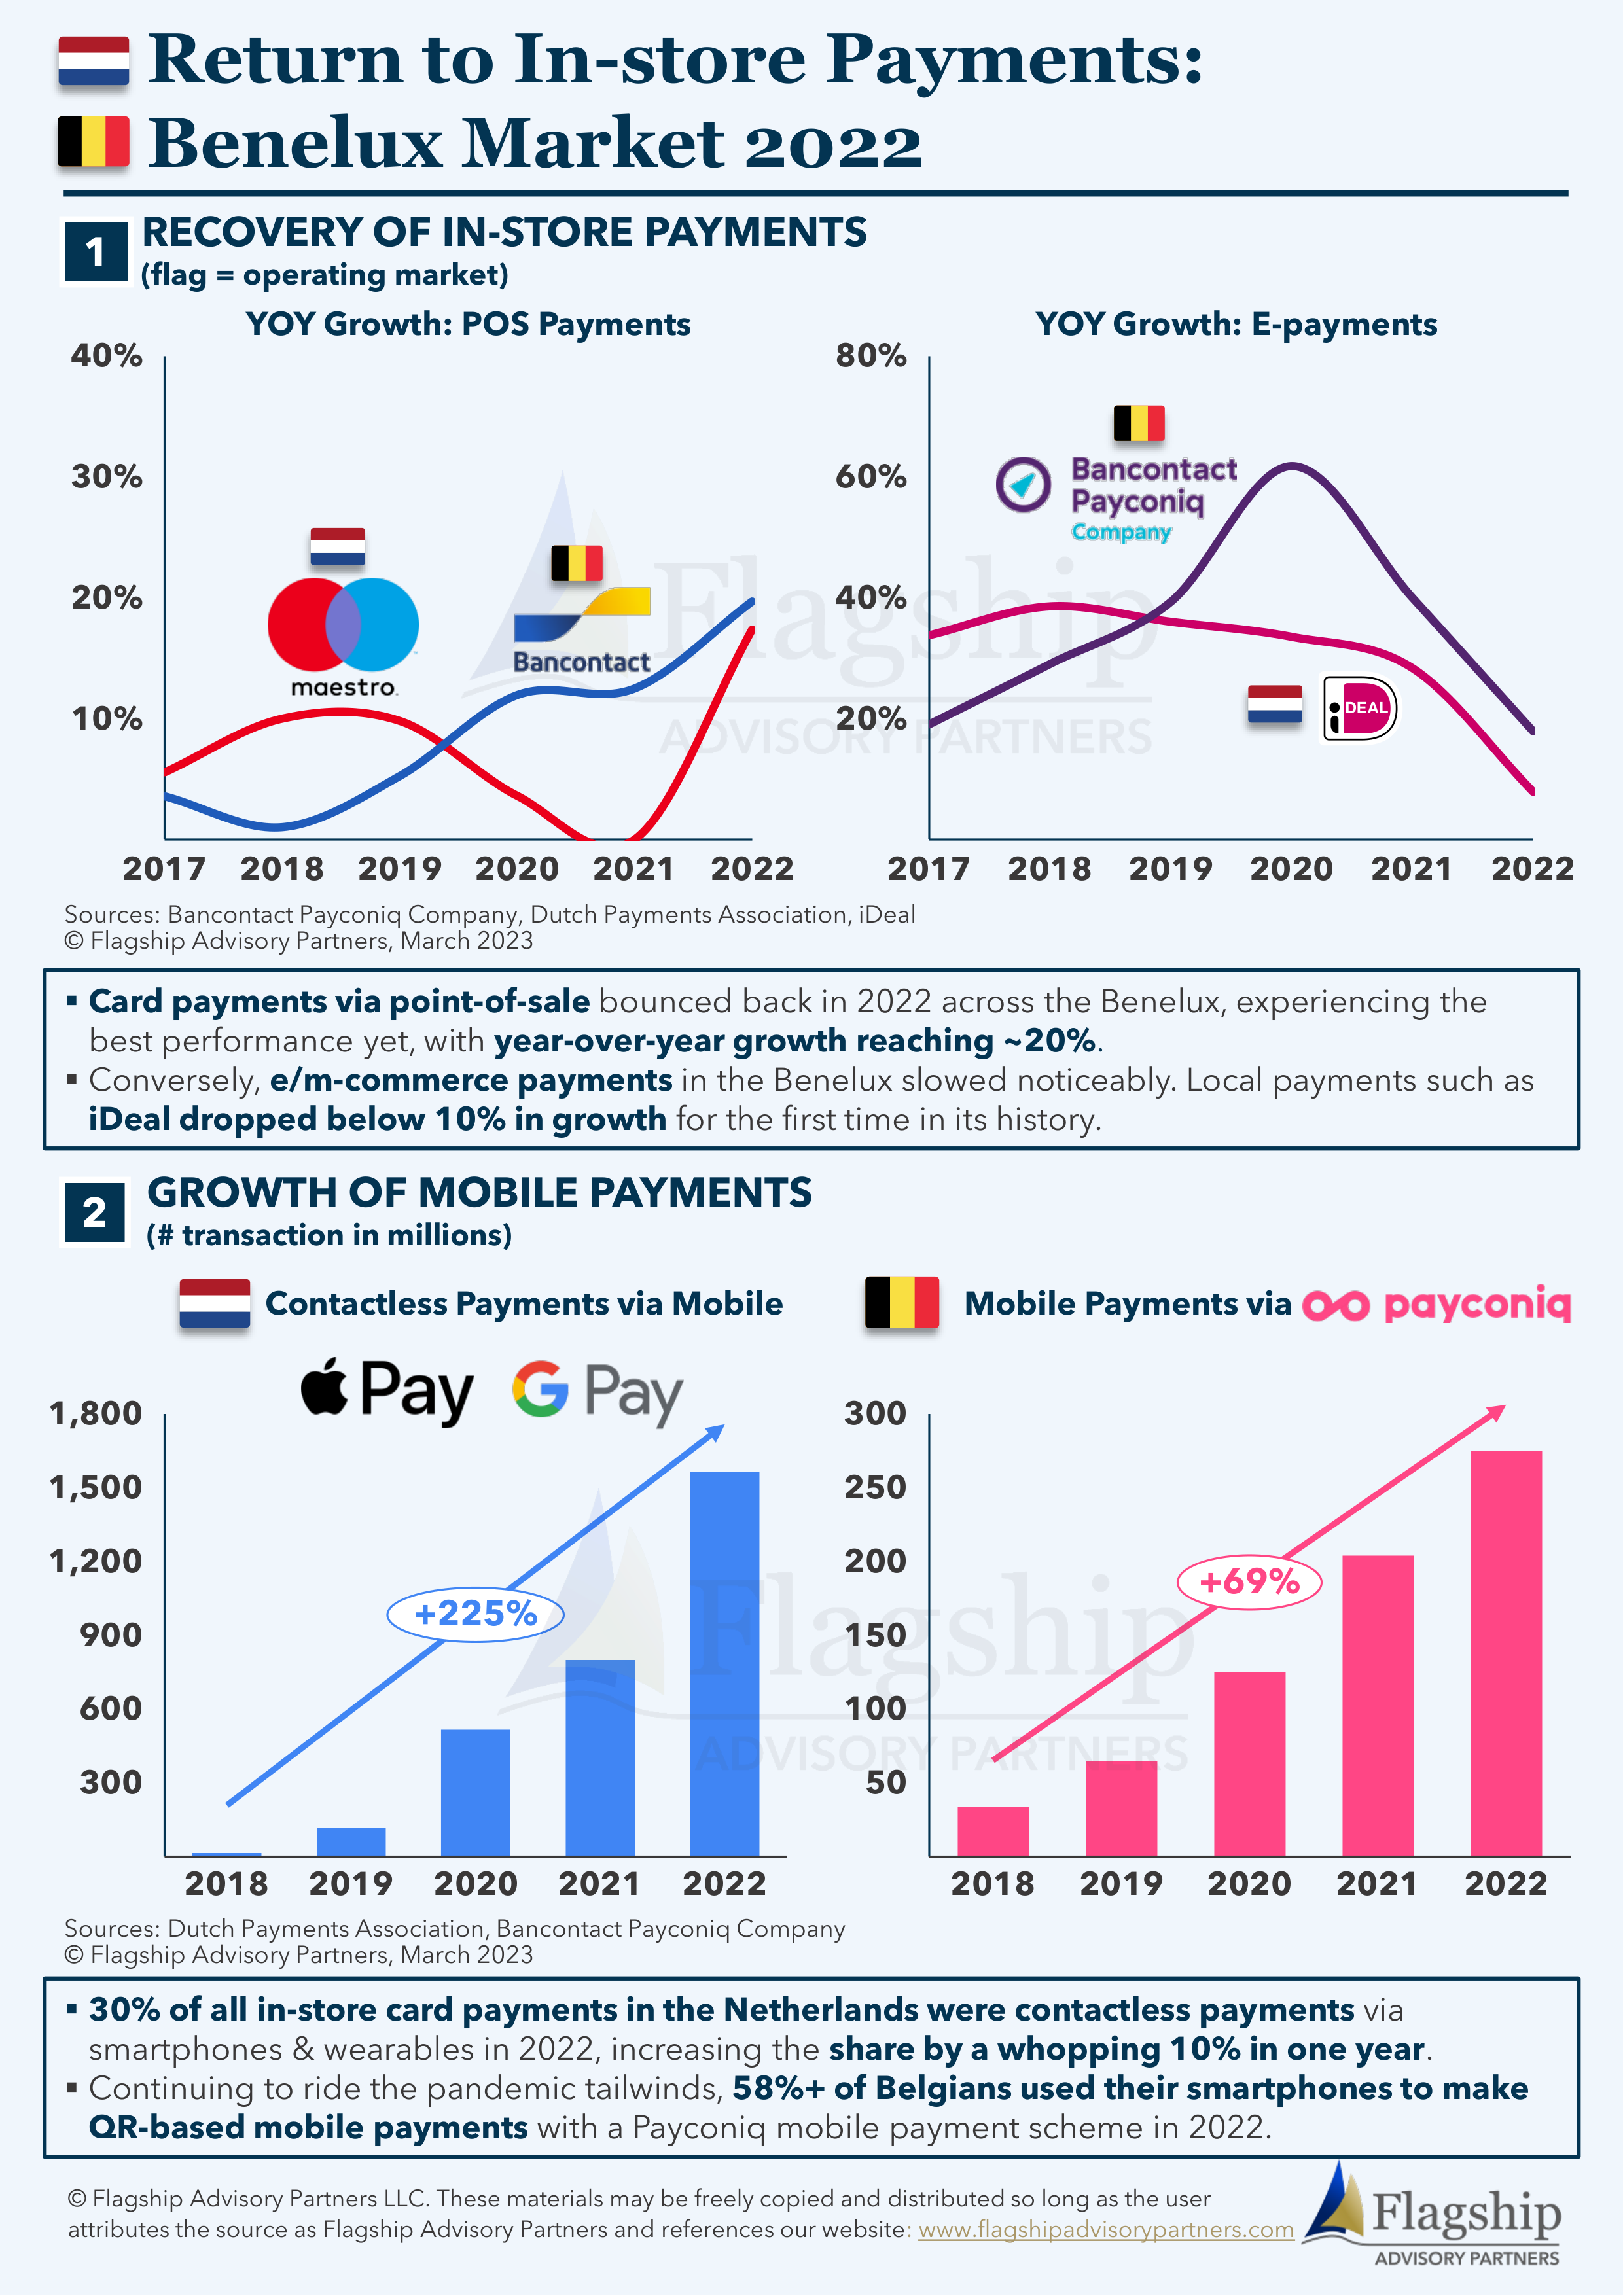 Infographic_Return to In-store Payments Benelux Market 2022_08March2023